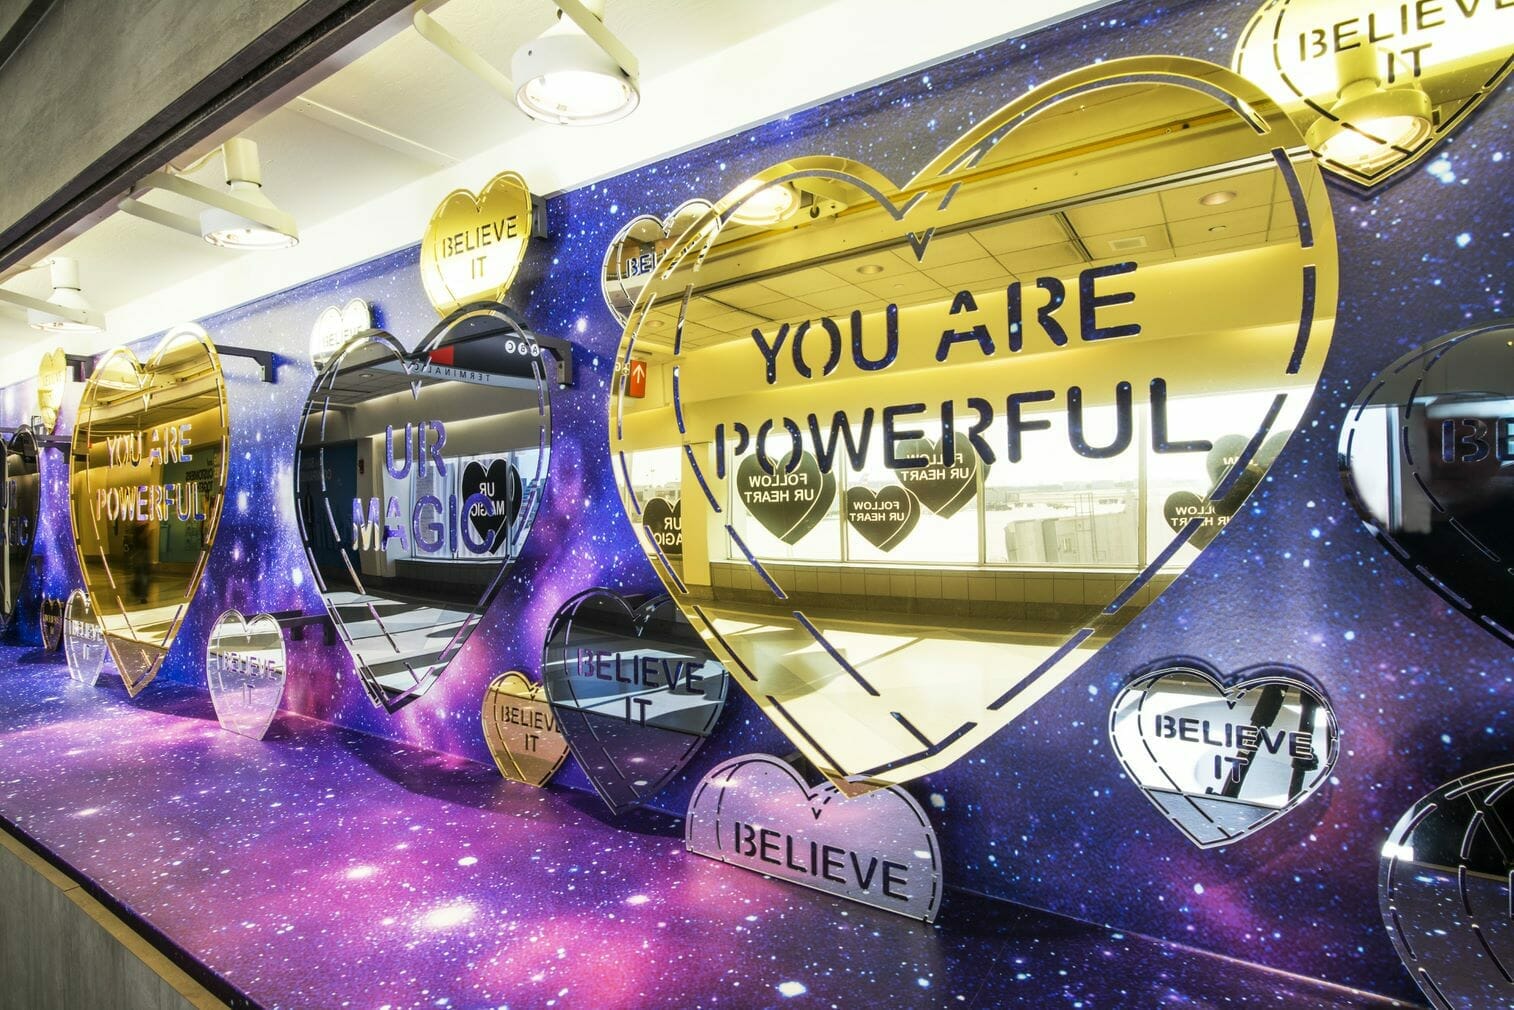 Follow UR Heart, 2019 by Amberella in Terminal C-D connector of Philadelphia International Airport. Photograph courtesy of Philadelphia International Airport.